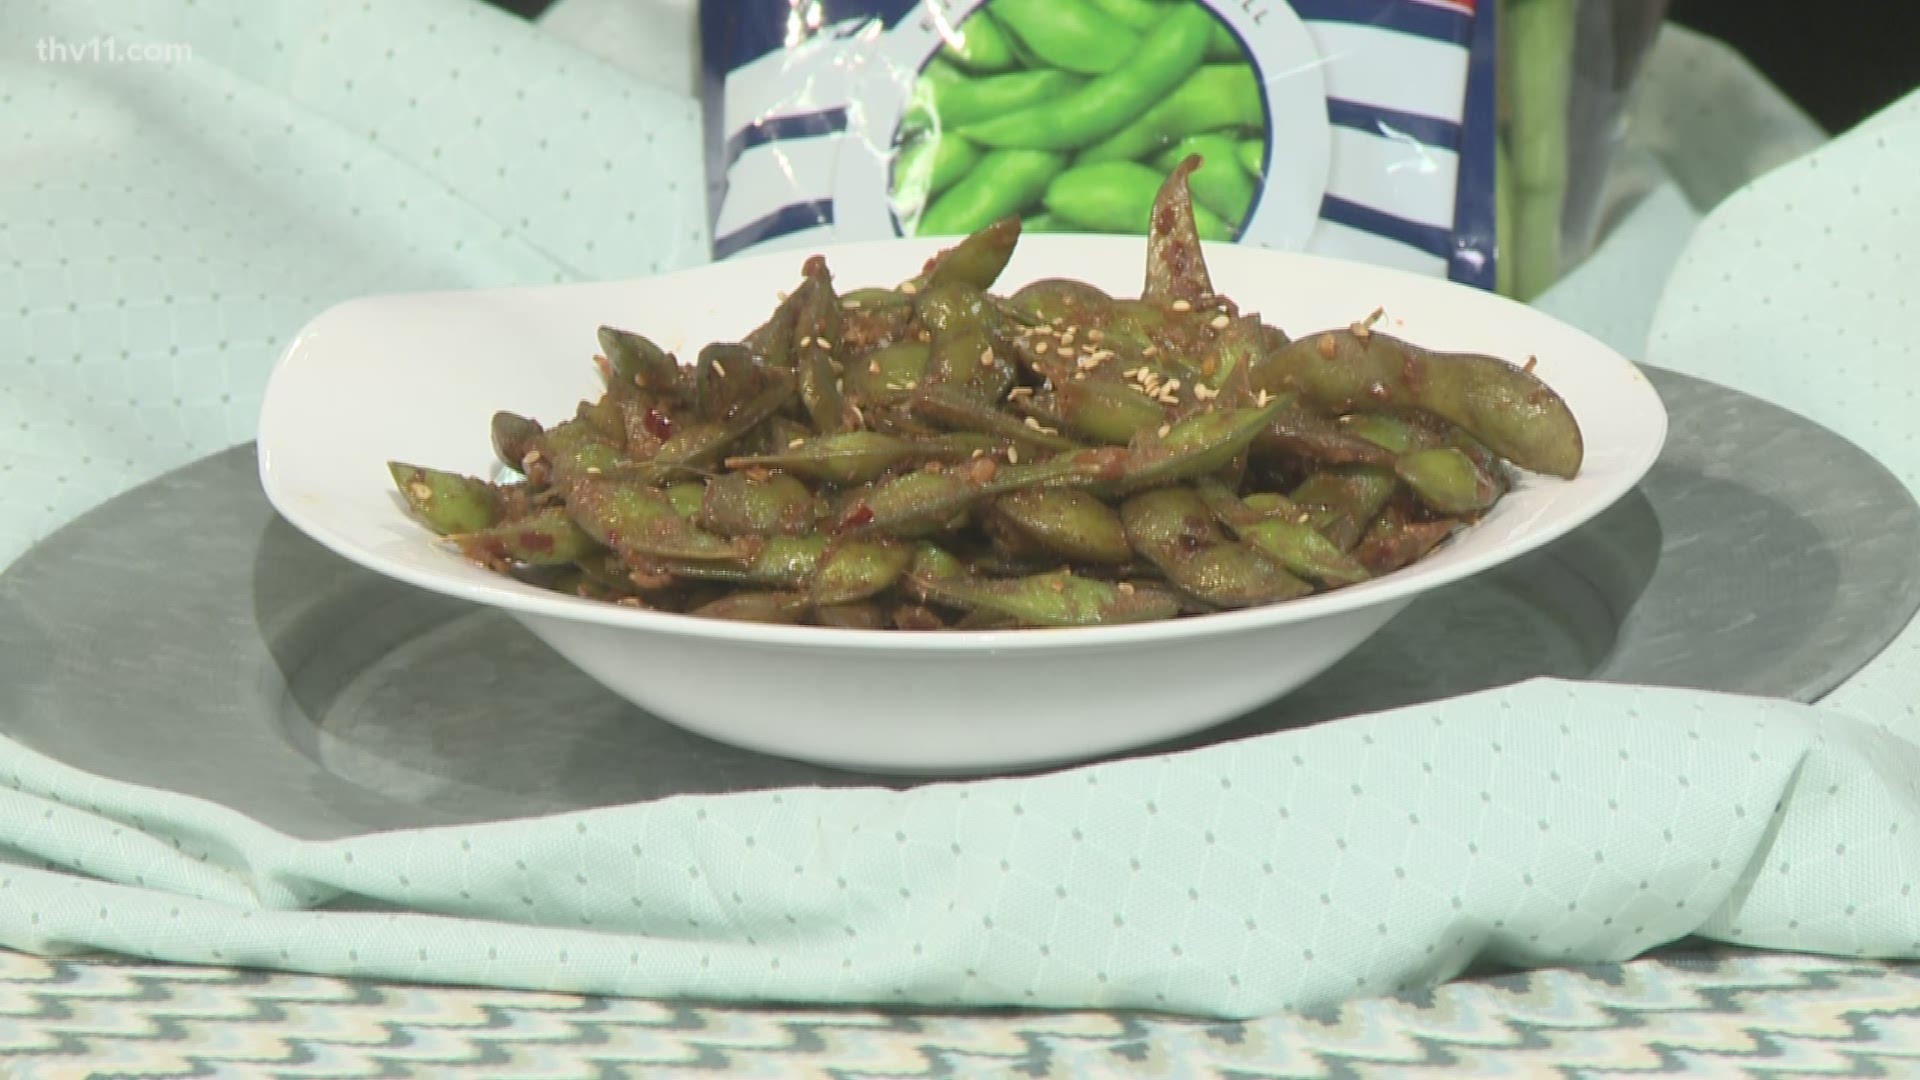 Debbie Arnold joined THV11 This Morning with a healthy but tasty recipe so that you can eat as many snacks as you want, without any guilt.